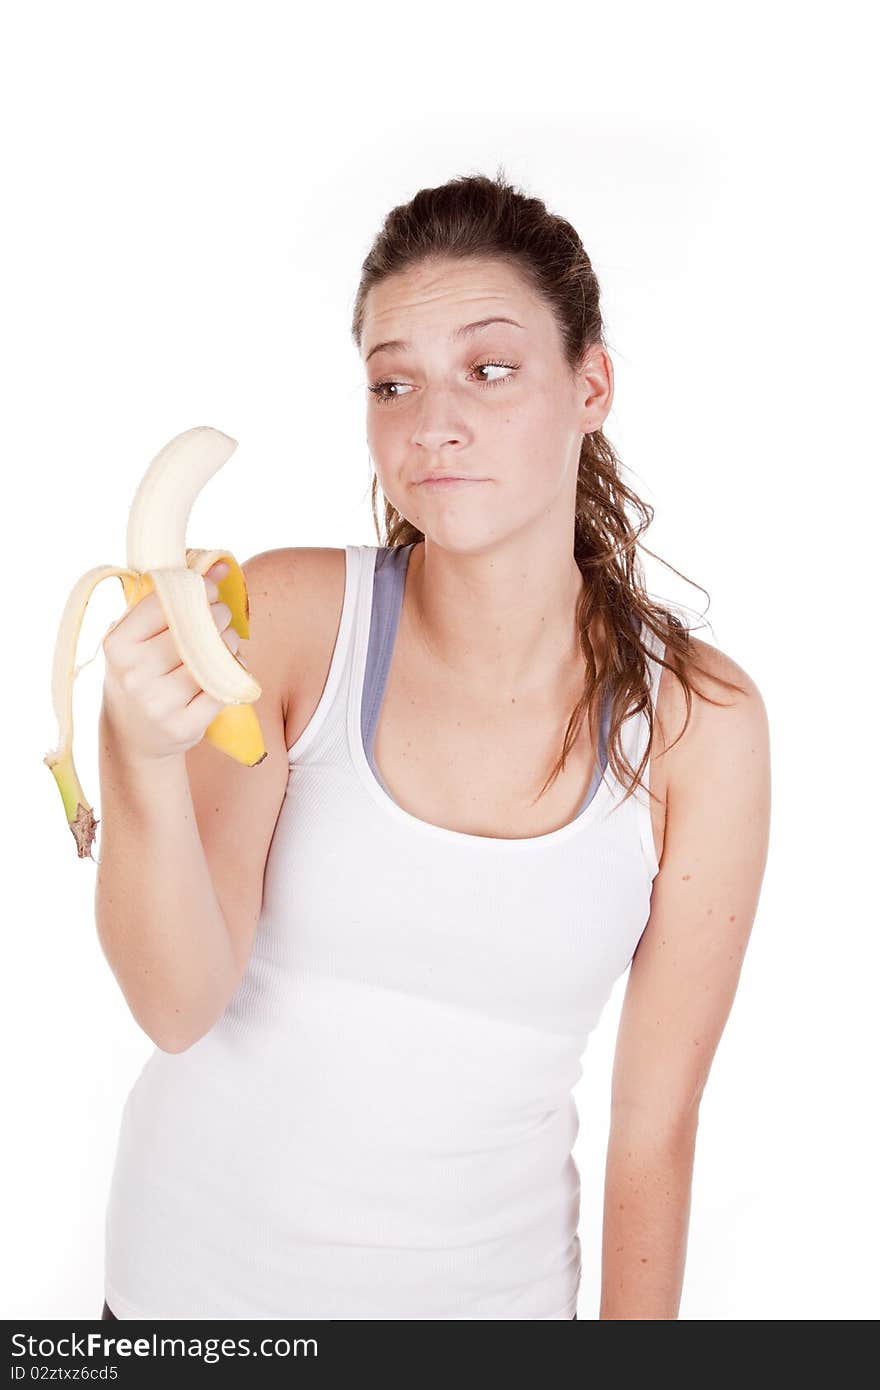 A woman is not sure if she wants to eat a banana. A woman is not sure if she wants to eat a banana.